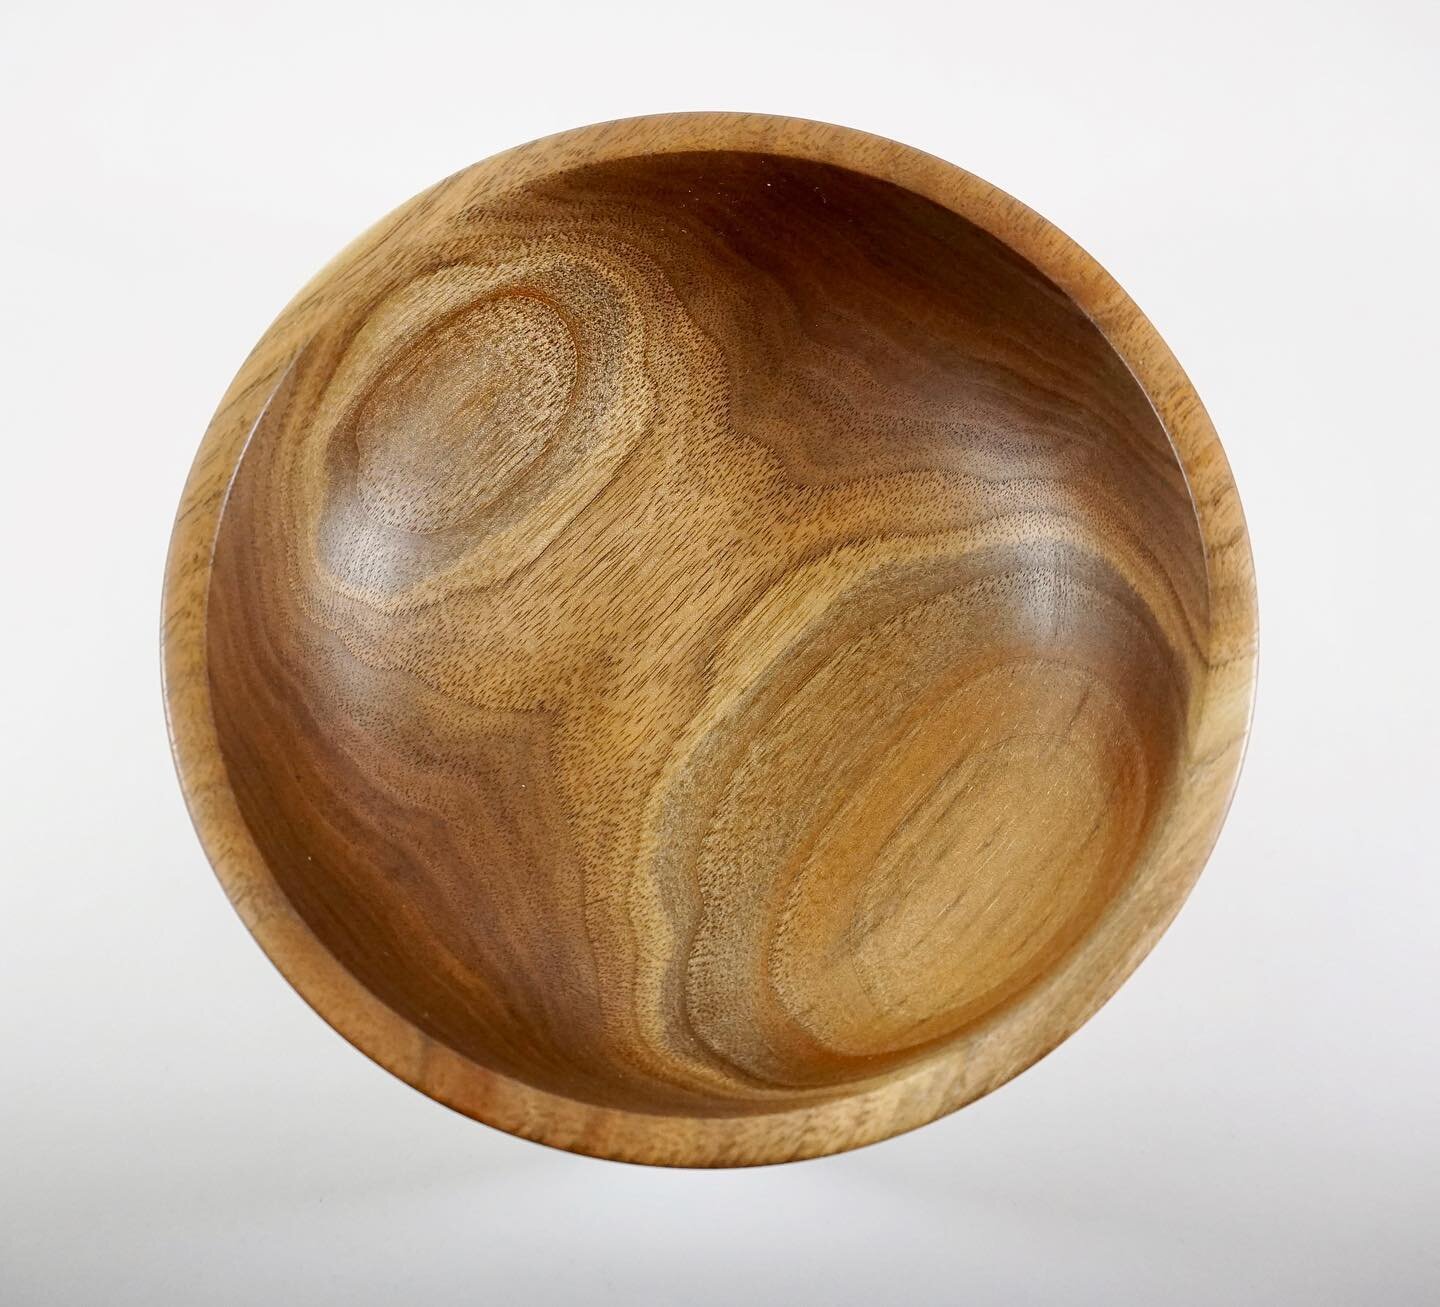 From tree to bowl. Years in the making, it was a pleasure to see this one pop to life once the finish was applied. 

For sale now at wispwoods.com, see like in bio. 

#wispwoods #handmade #treeto bowl #shopsmall #hifromsouthdakota